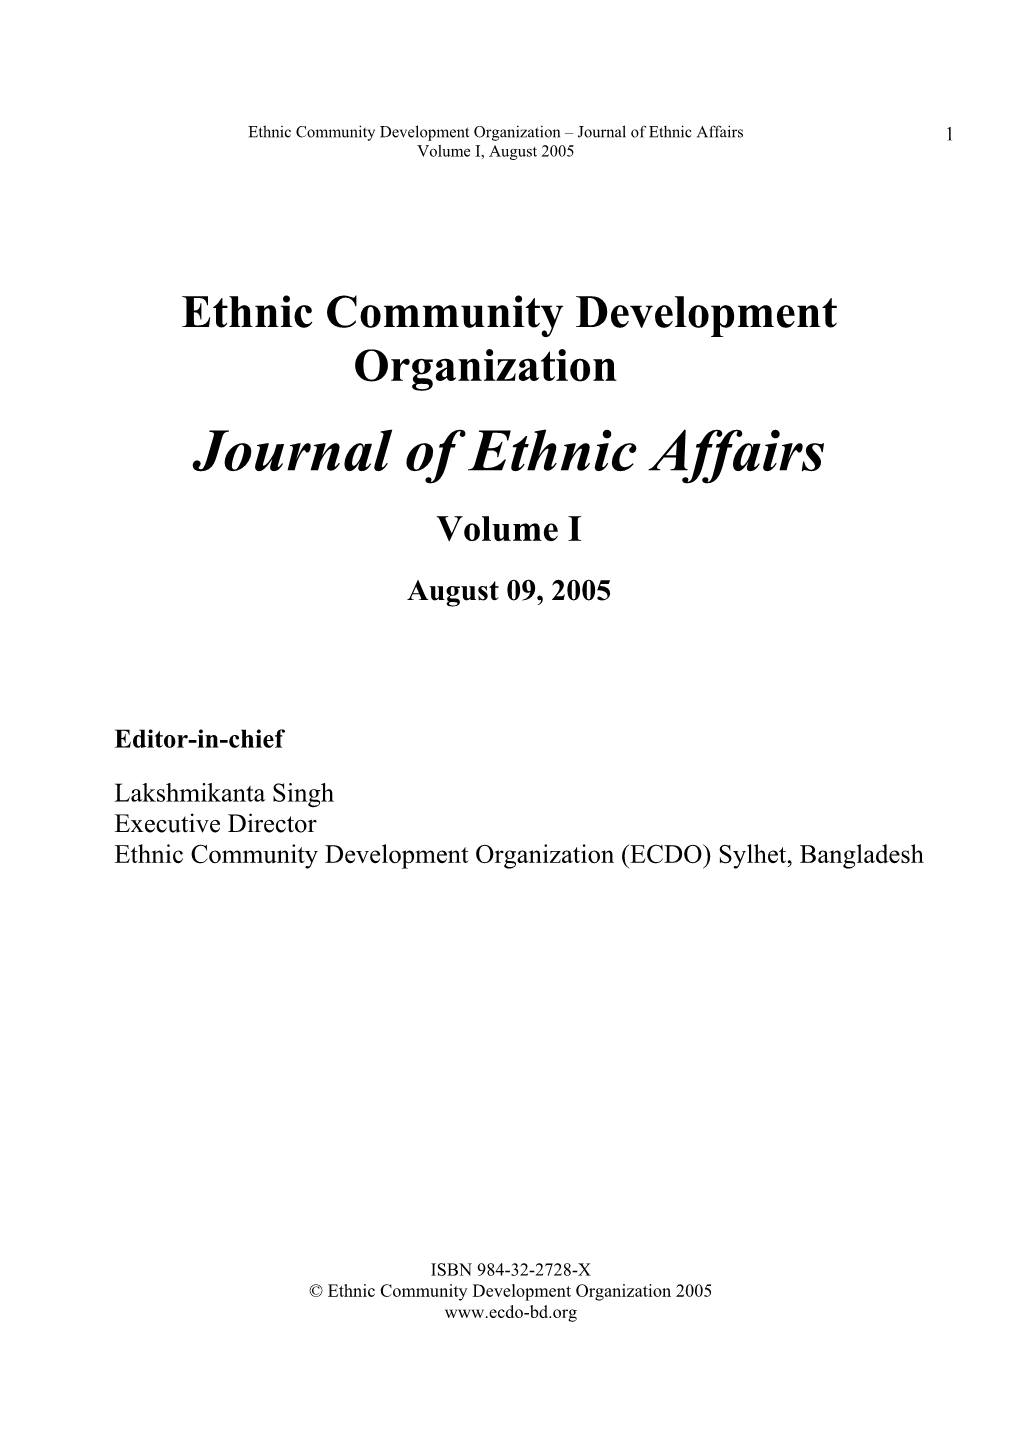 Journal of Ethnic Affairs 1 Volume I, August 2005